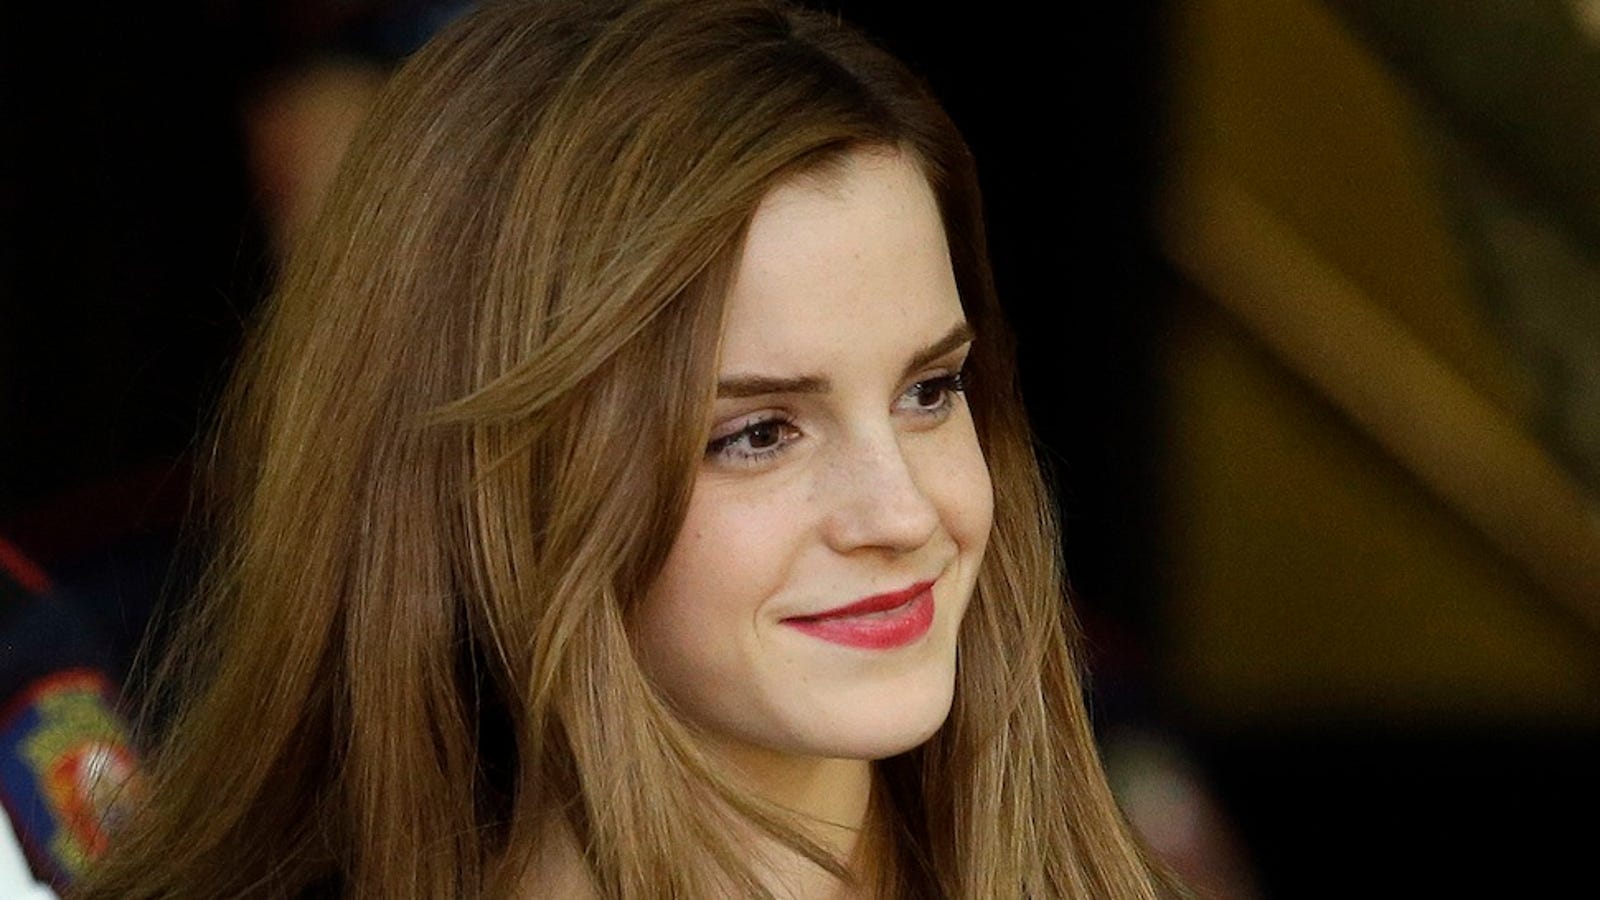 Emma Watson Nude Clock Was A Hoax Designed To Bring Down 4chan